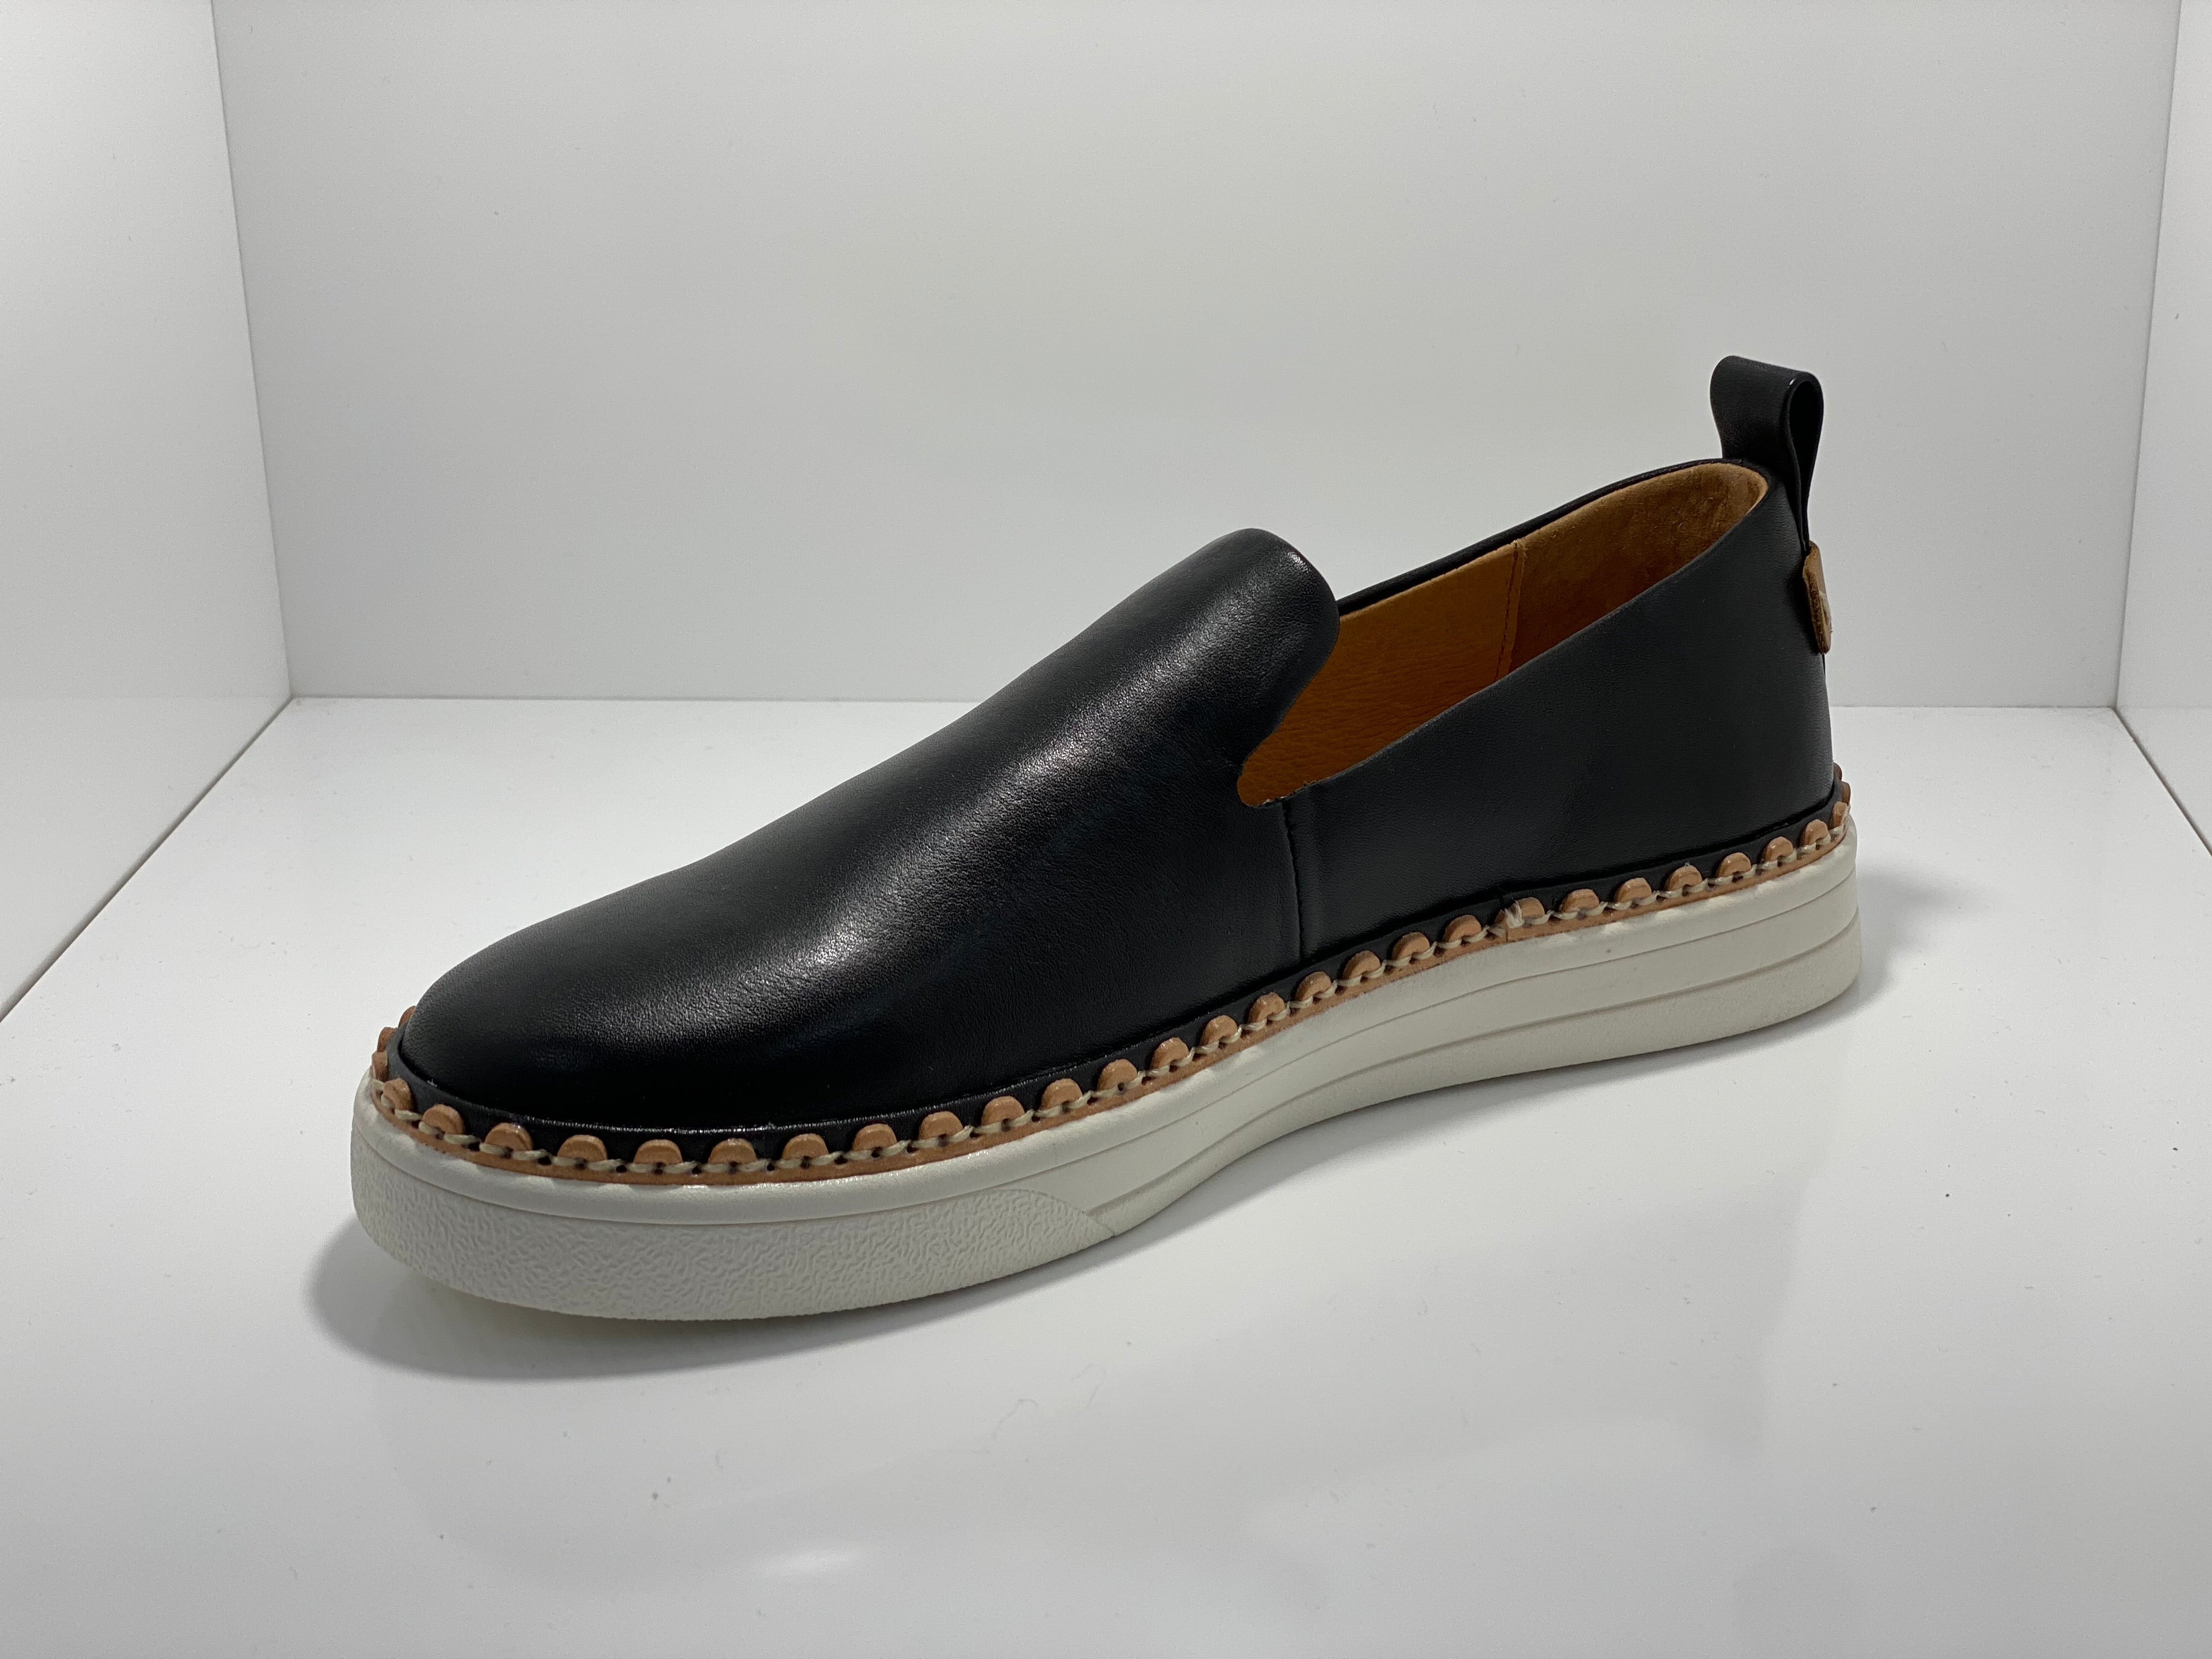 Moor Leather Slip On Casual Leather Shoe by EOS